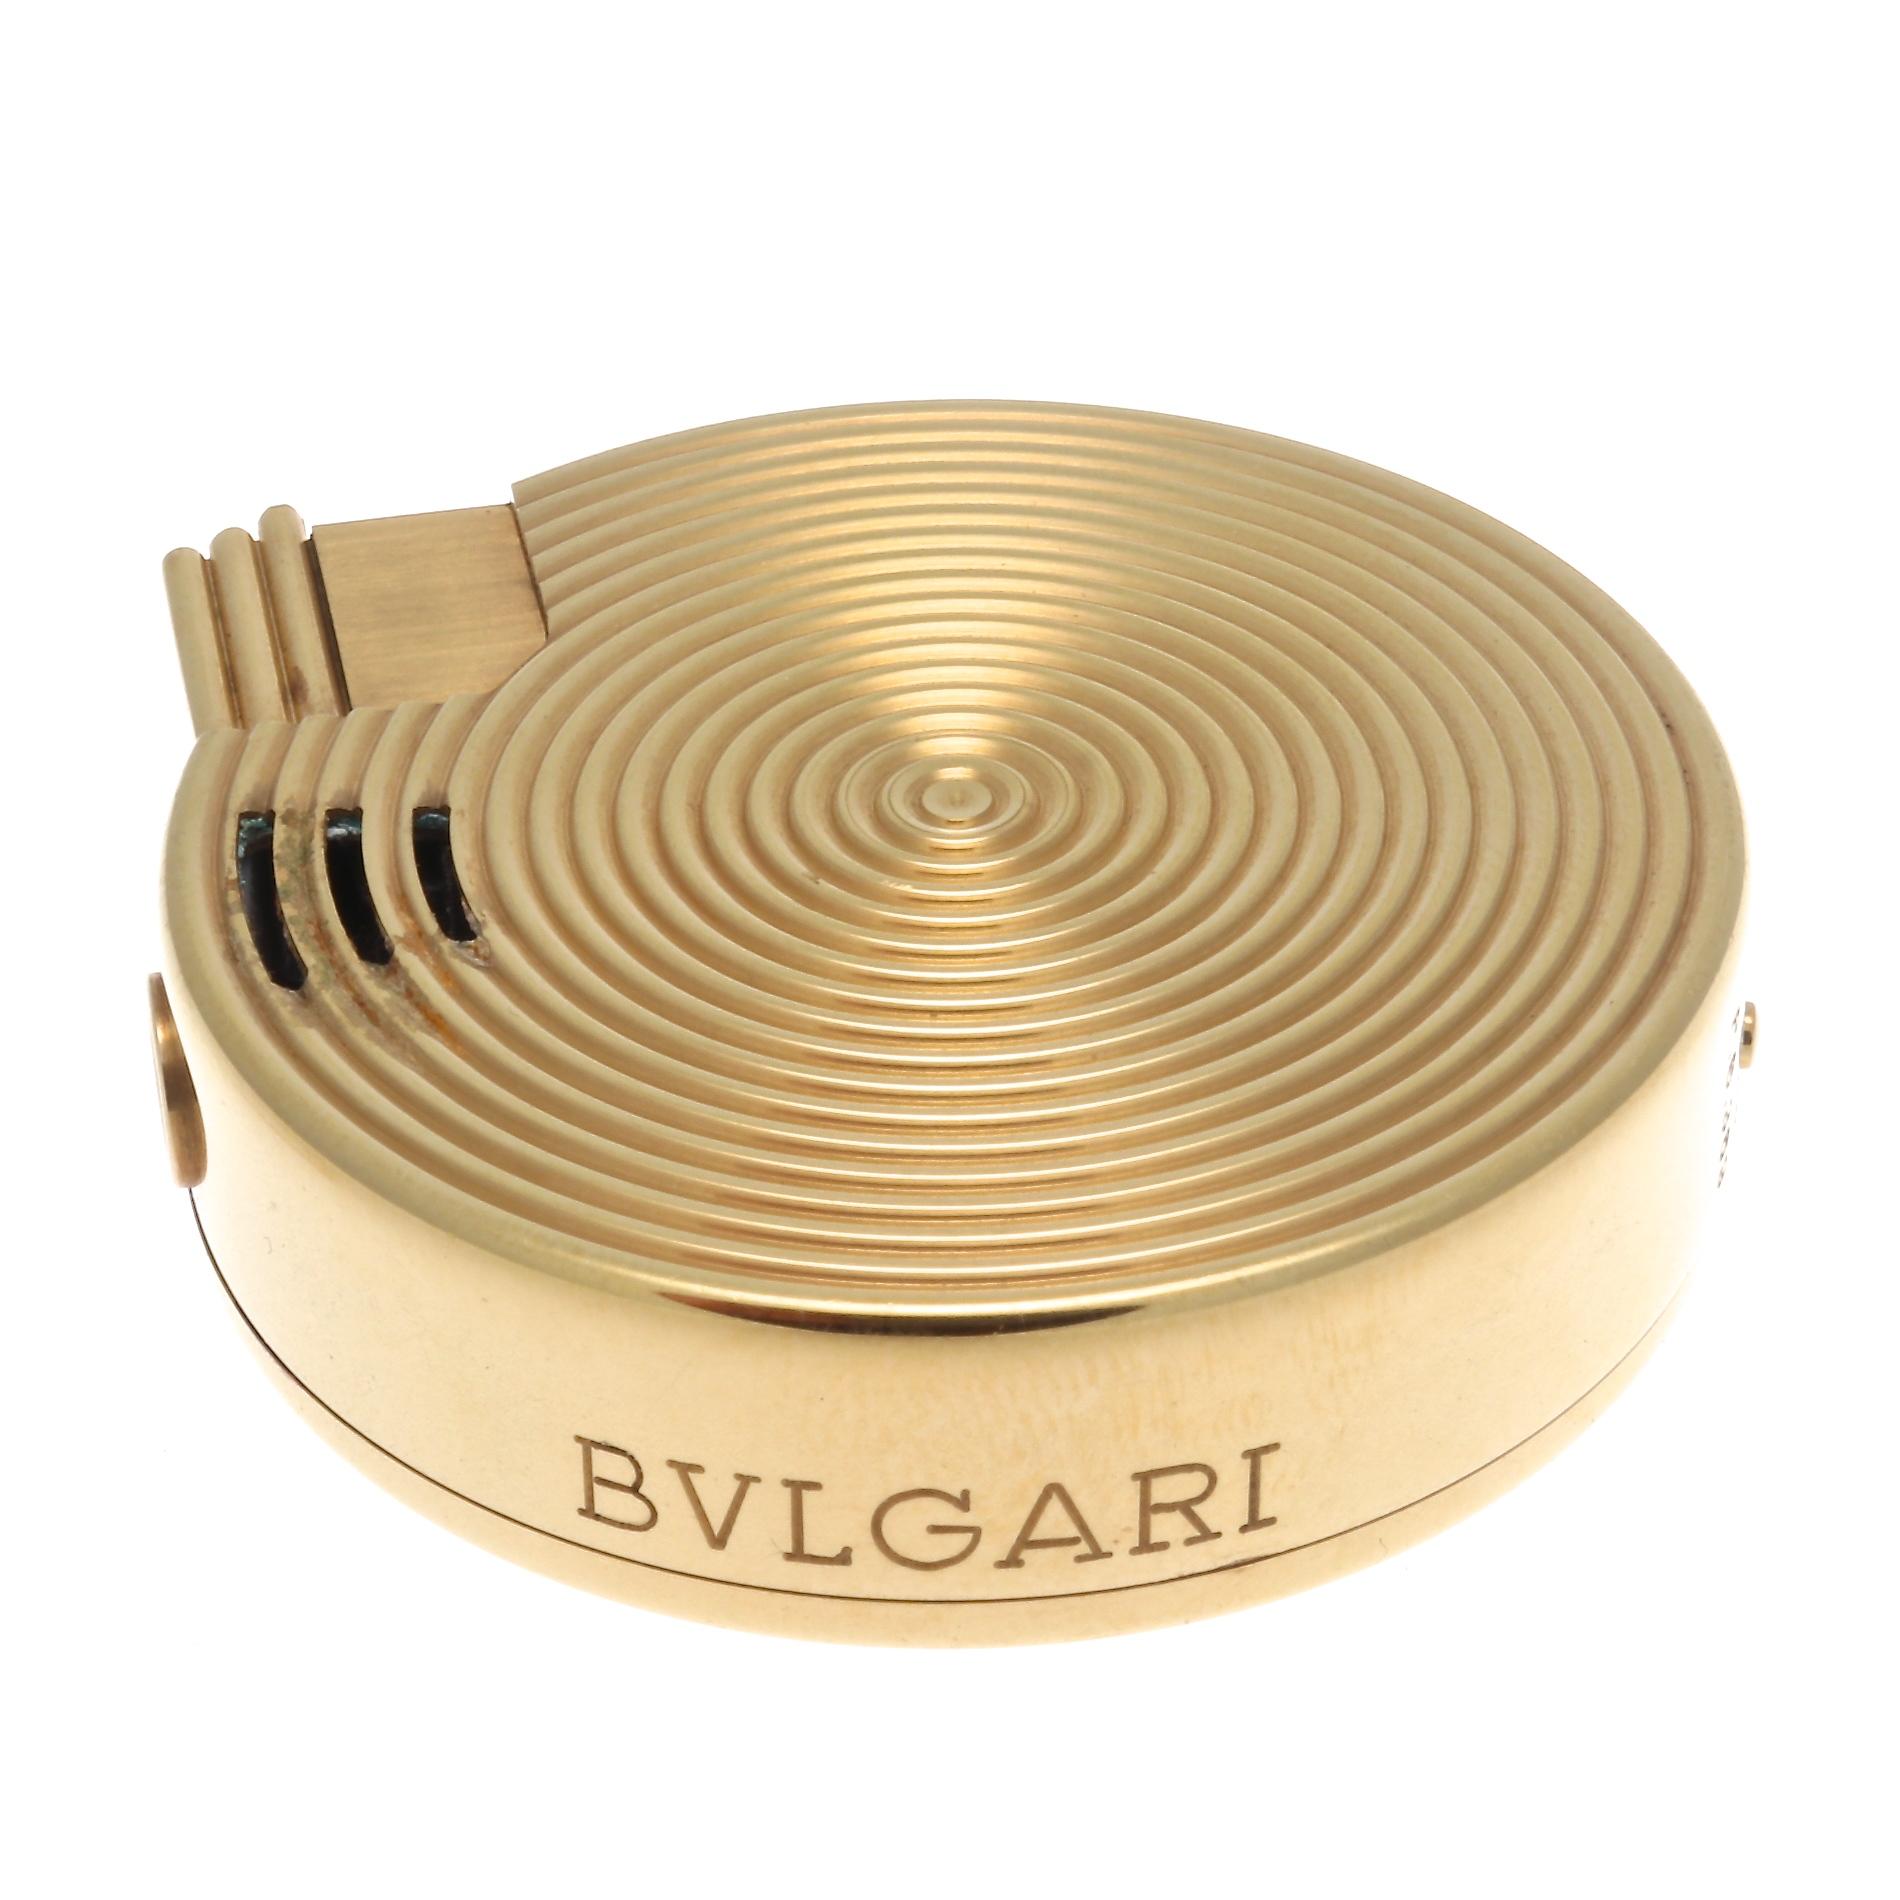 A hypnotic creation from Bulgari. Another unique design to add to the collection. Designed in 18k gold. Signed Bvlgari and numbered. 